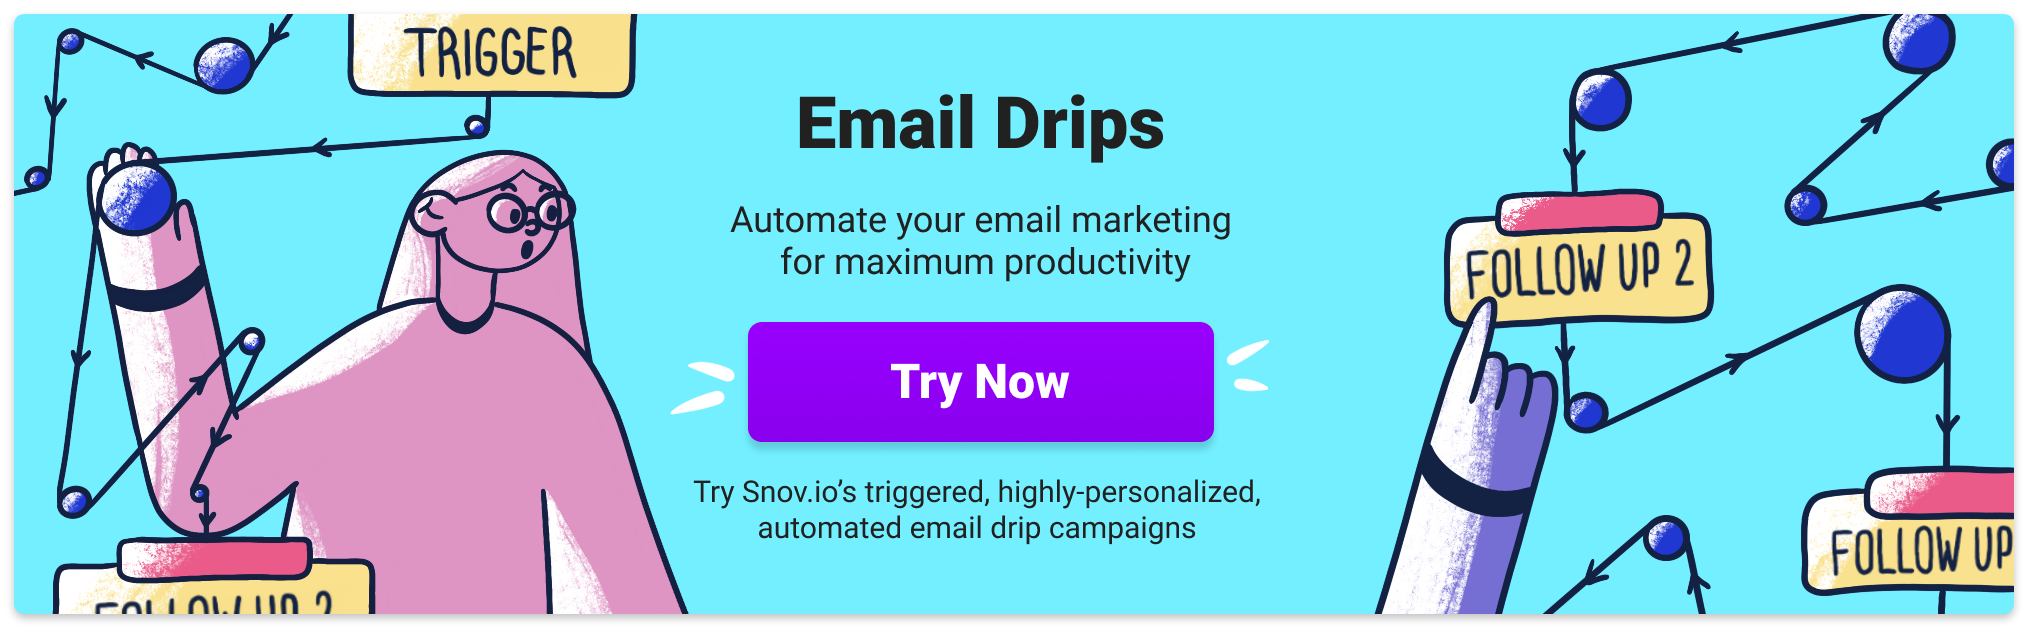 Email drip campaigns - a triggered email sender